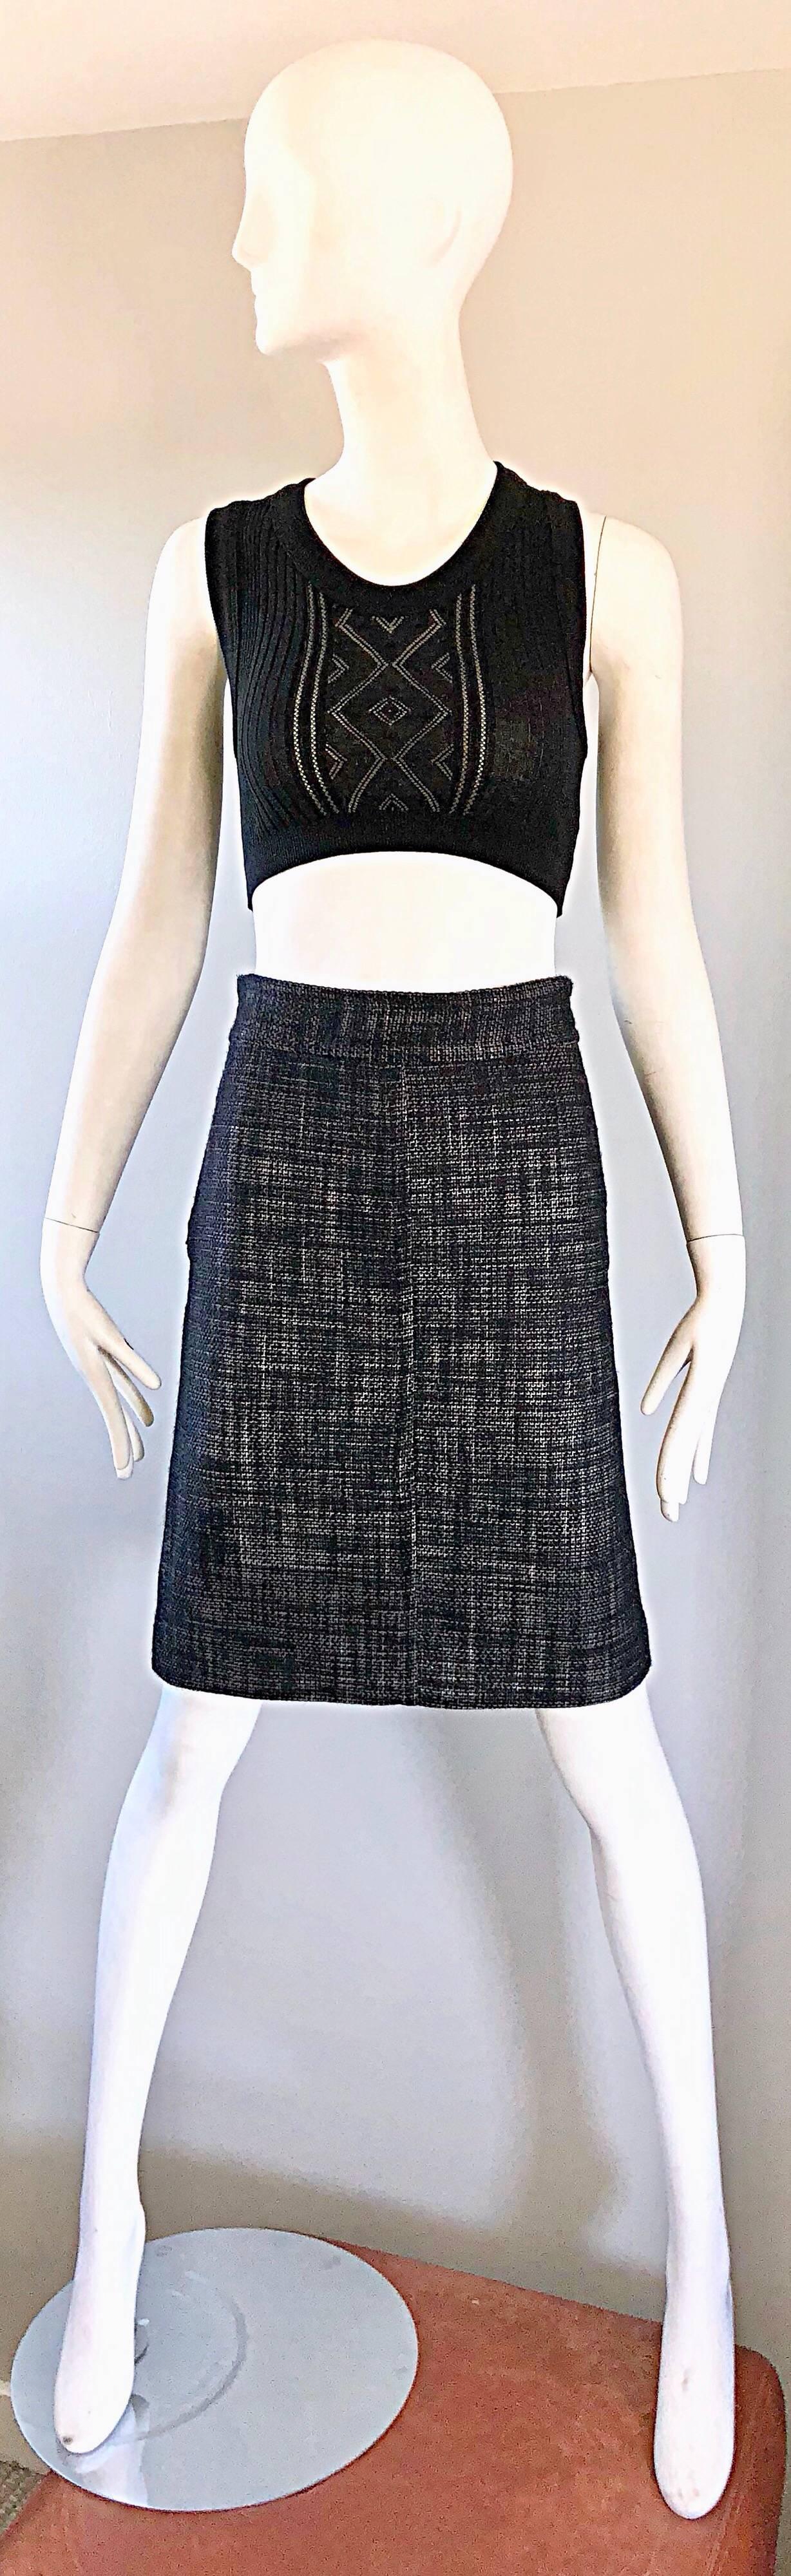 New MARC JACOBS Collection black and white pencil skirt! Soft virgin wool (53%) and cotton (47%) blend offers a slight stretch. Full metal zipper up each side of the skirt. Fully lined. The perfect timeless skirt! In great unworn condition. Made in